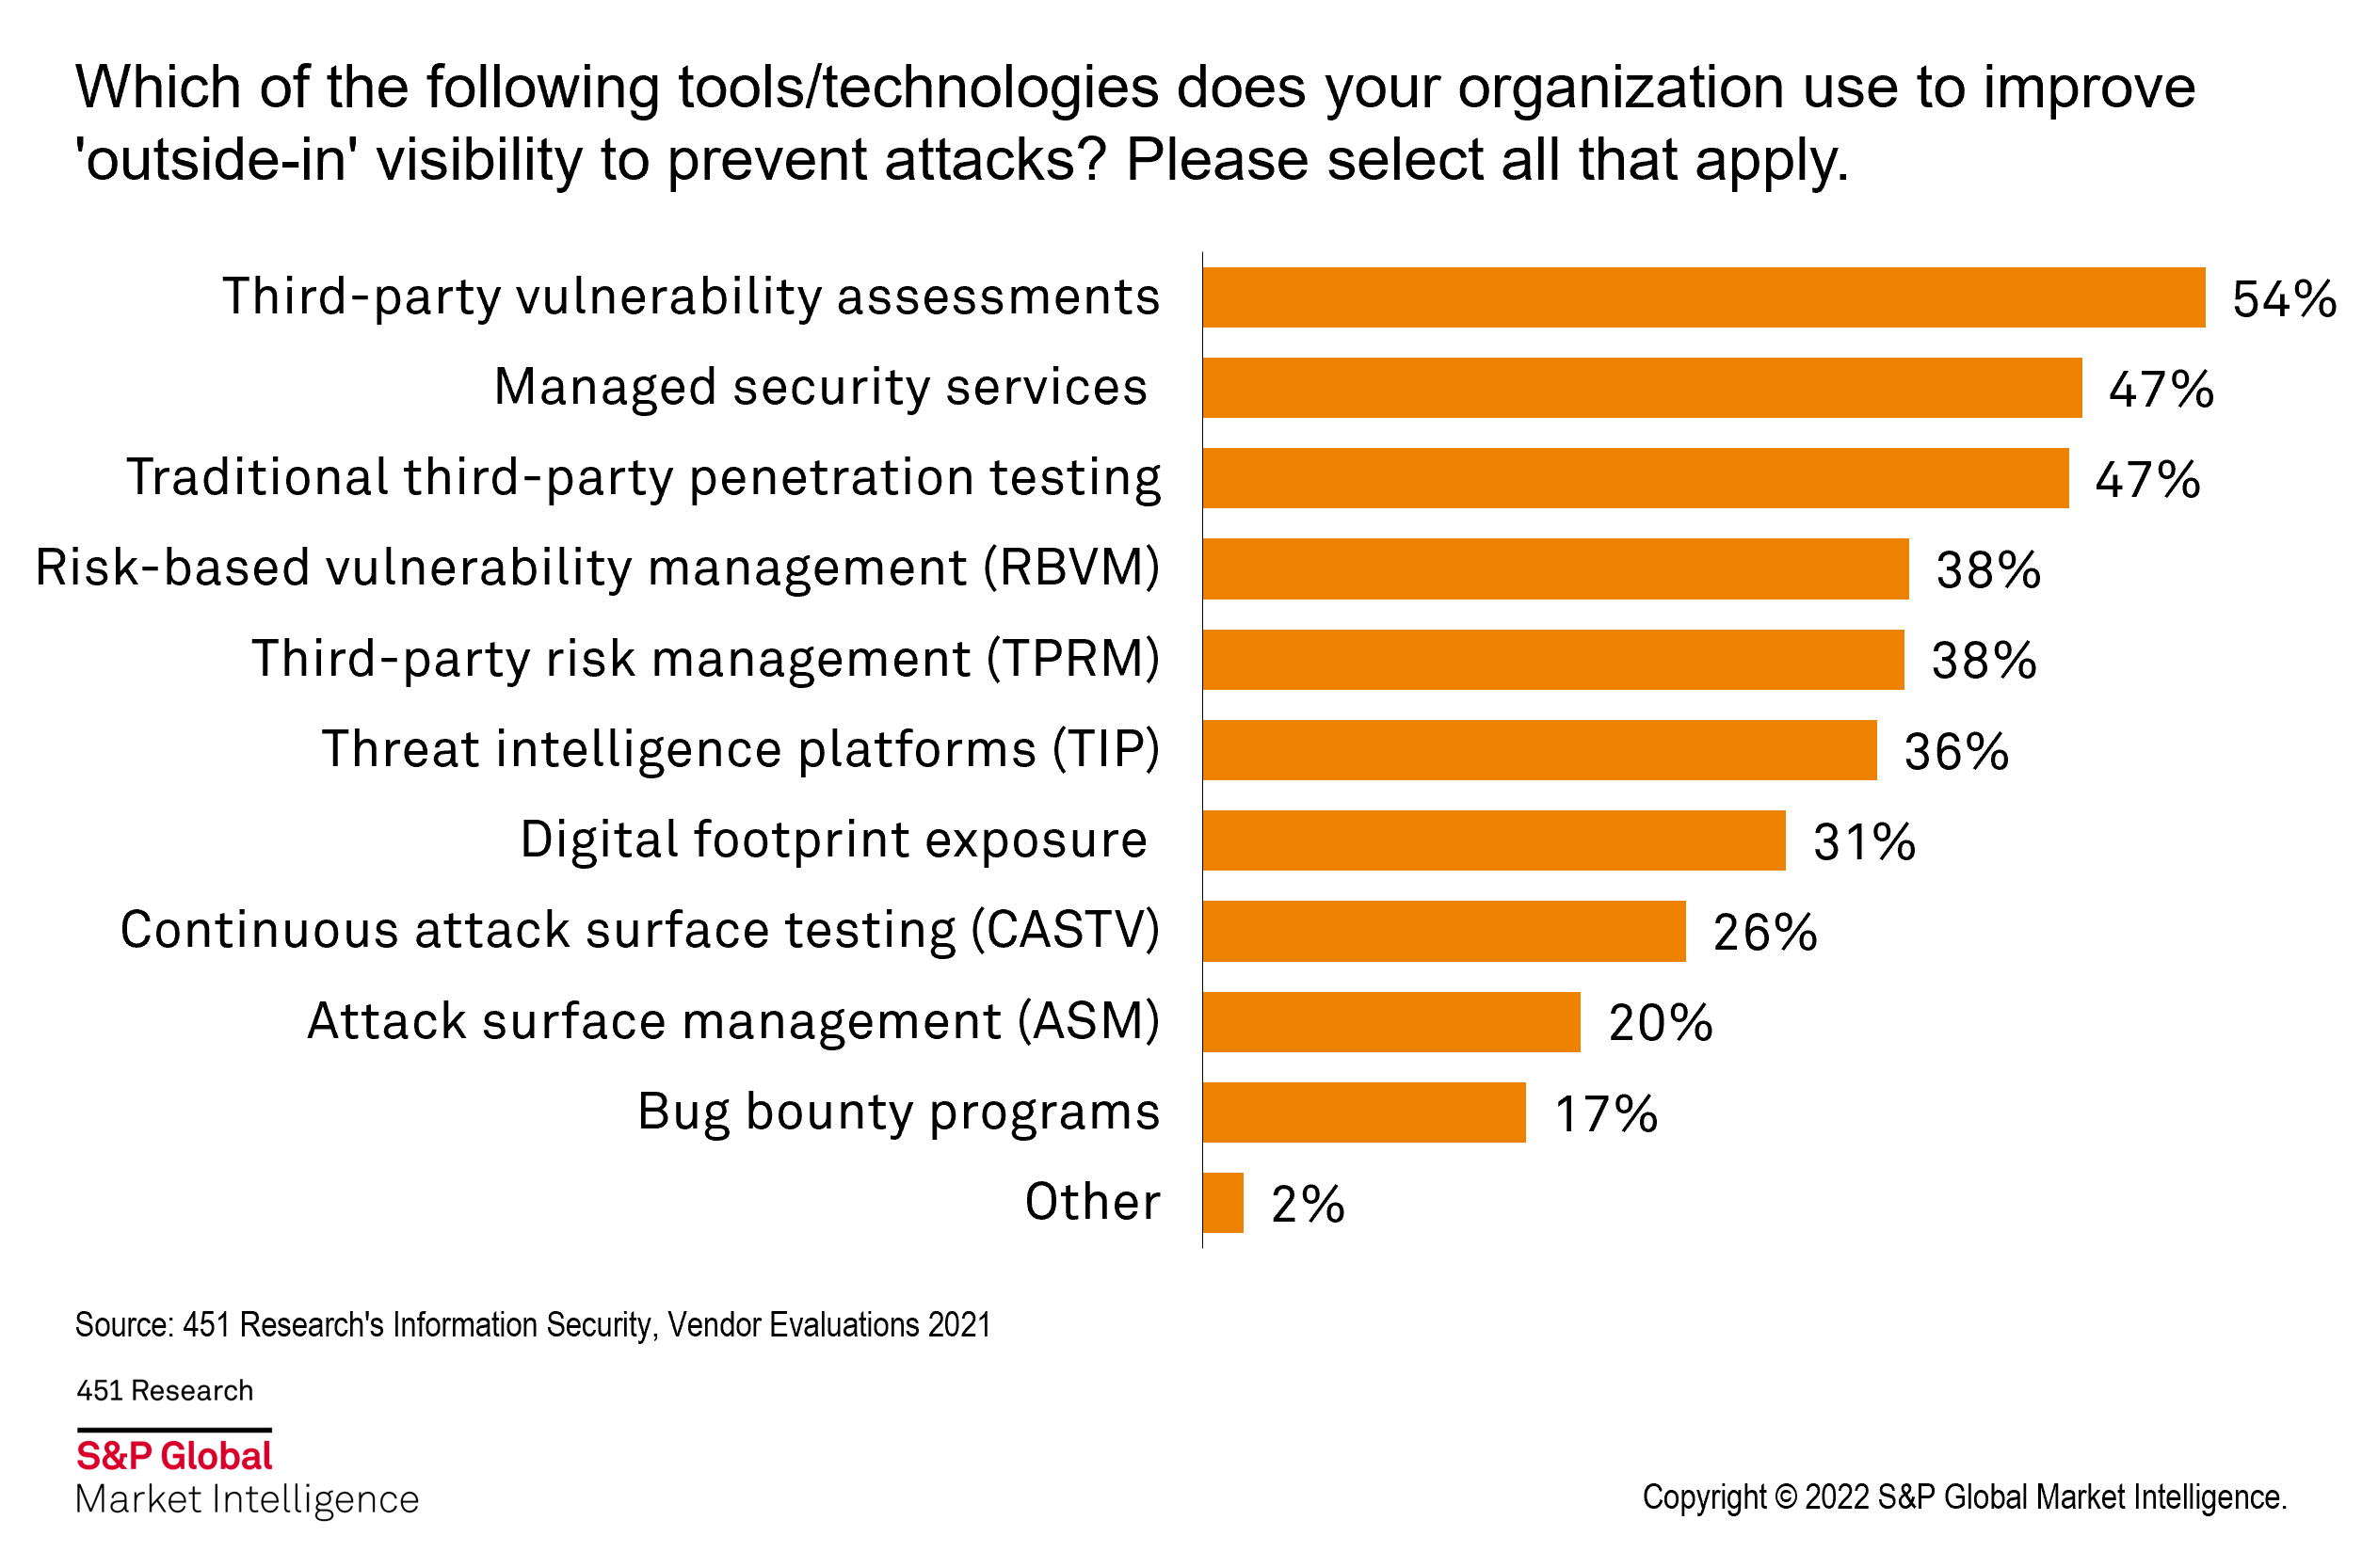 Which of the following tools/technologies does your organization use to improve 'outside-in' visibility to prevent attacks?